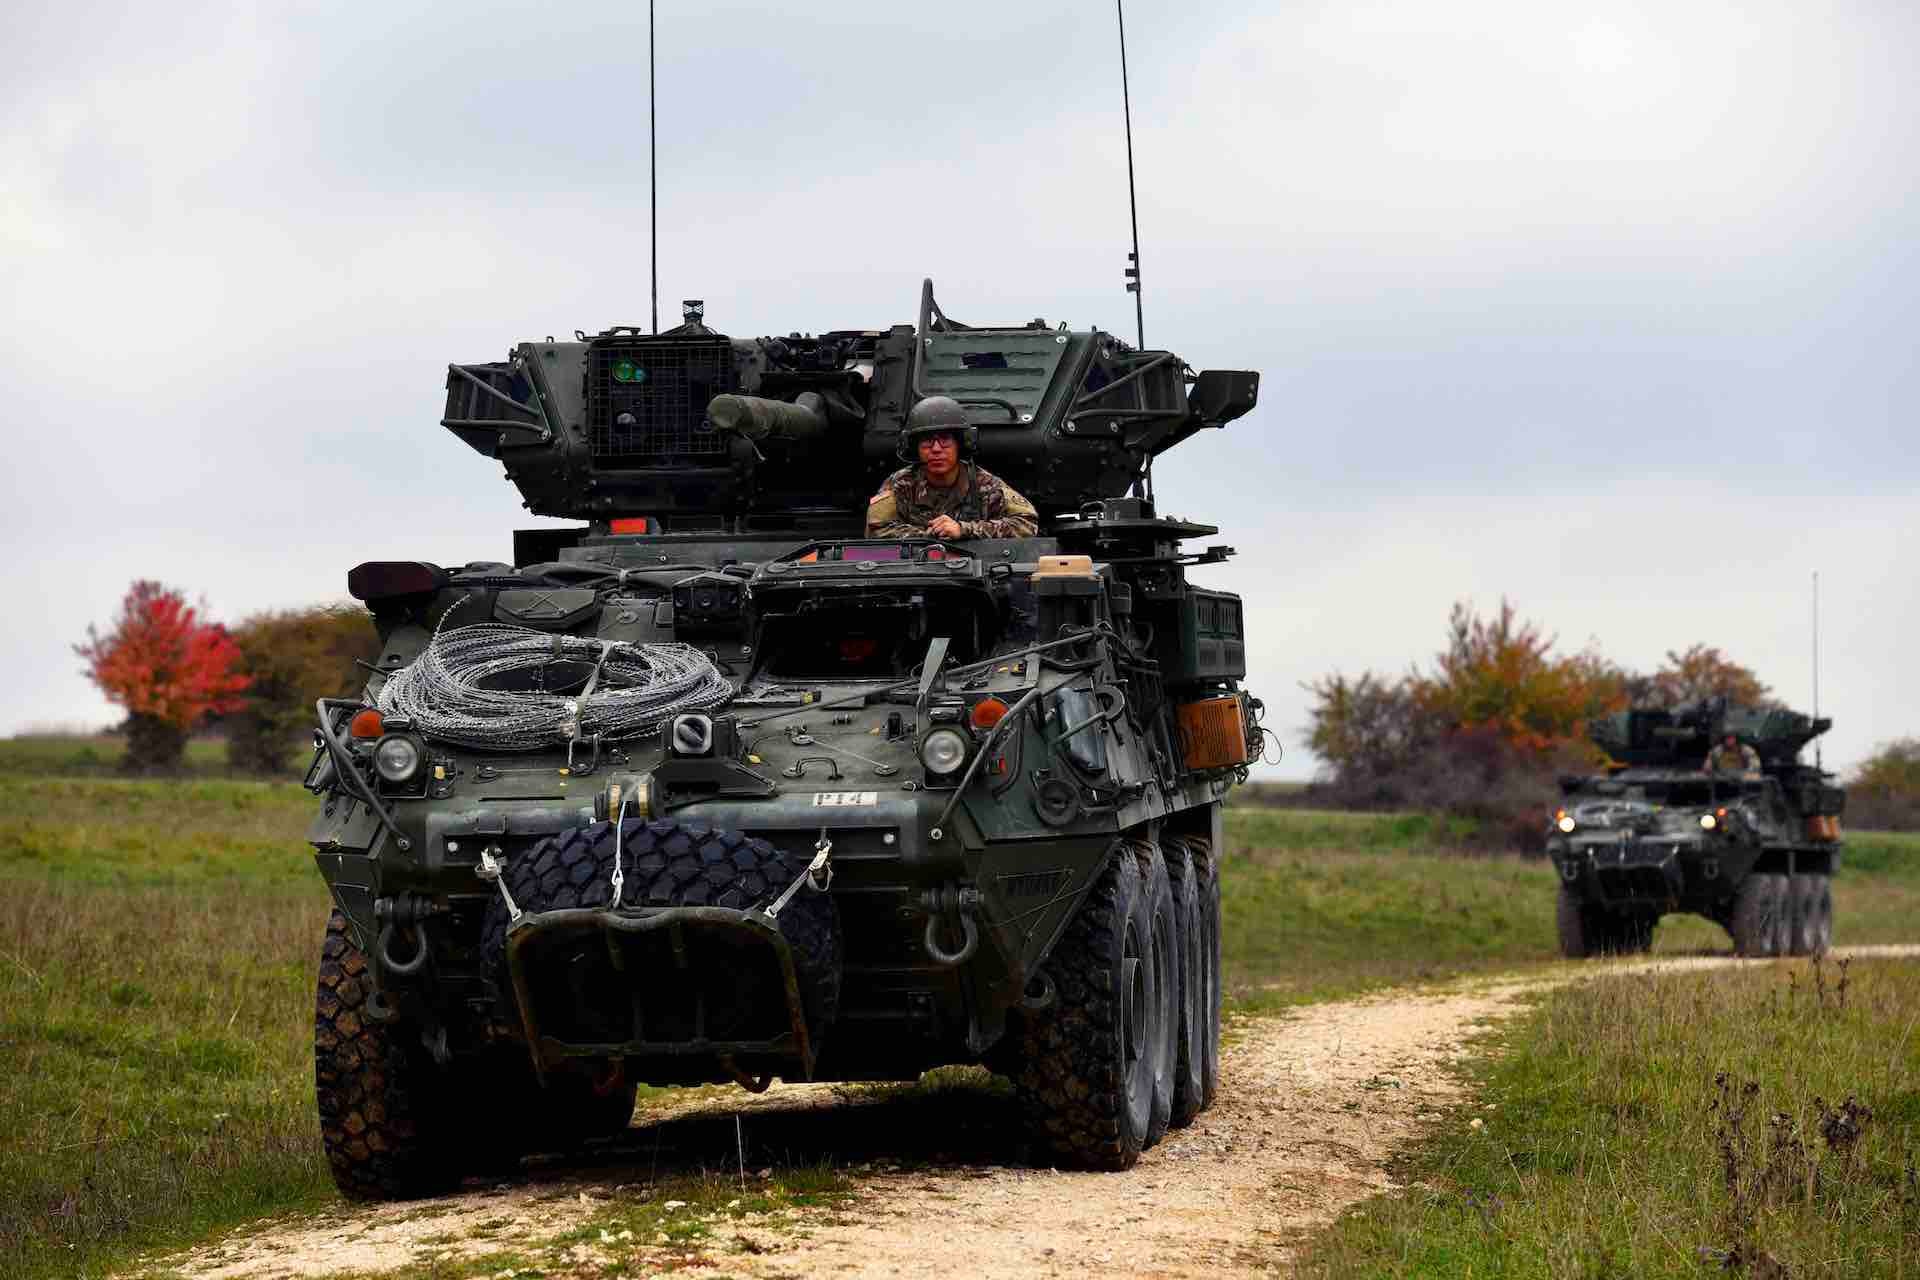 U.S. Soldiers, assigned to Palehorse Troop, 4th Squadron, 2nd Cavalry Regiment, maneuver in their Stryker vehicles during a situational training exercise at the 7th Army Training Command's Grafenwoehr Training Area, Germany, Oct. 13, 2022. 2CR provides the 7th ATC with a lethal and agile force capable of rapid deployment throughout the European theater in order to assure allies, deter adversaries, and when ordered, defend the NATO alliance. (U.S. Army photo by Markus Rauchenberger)